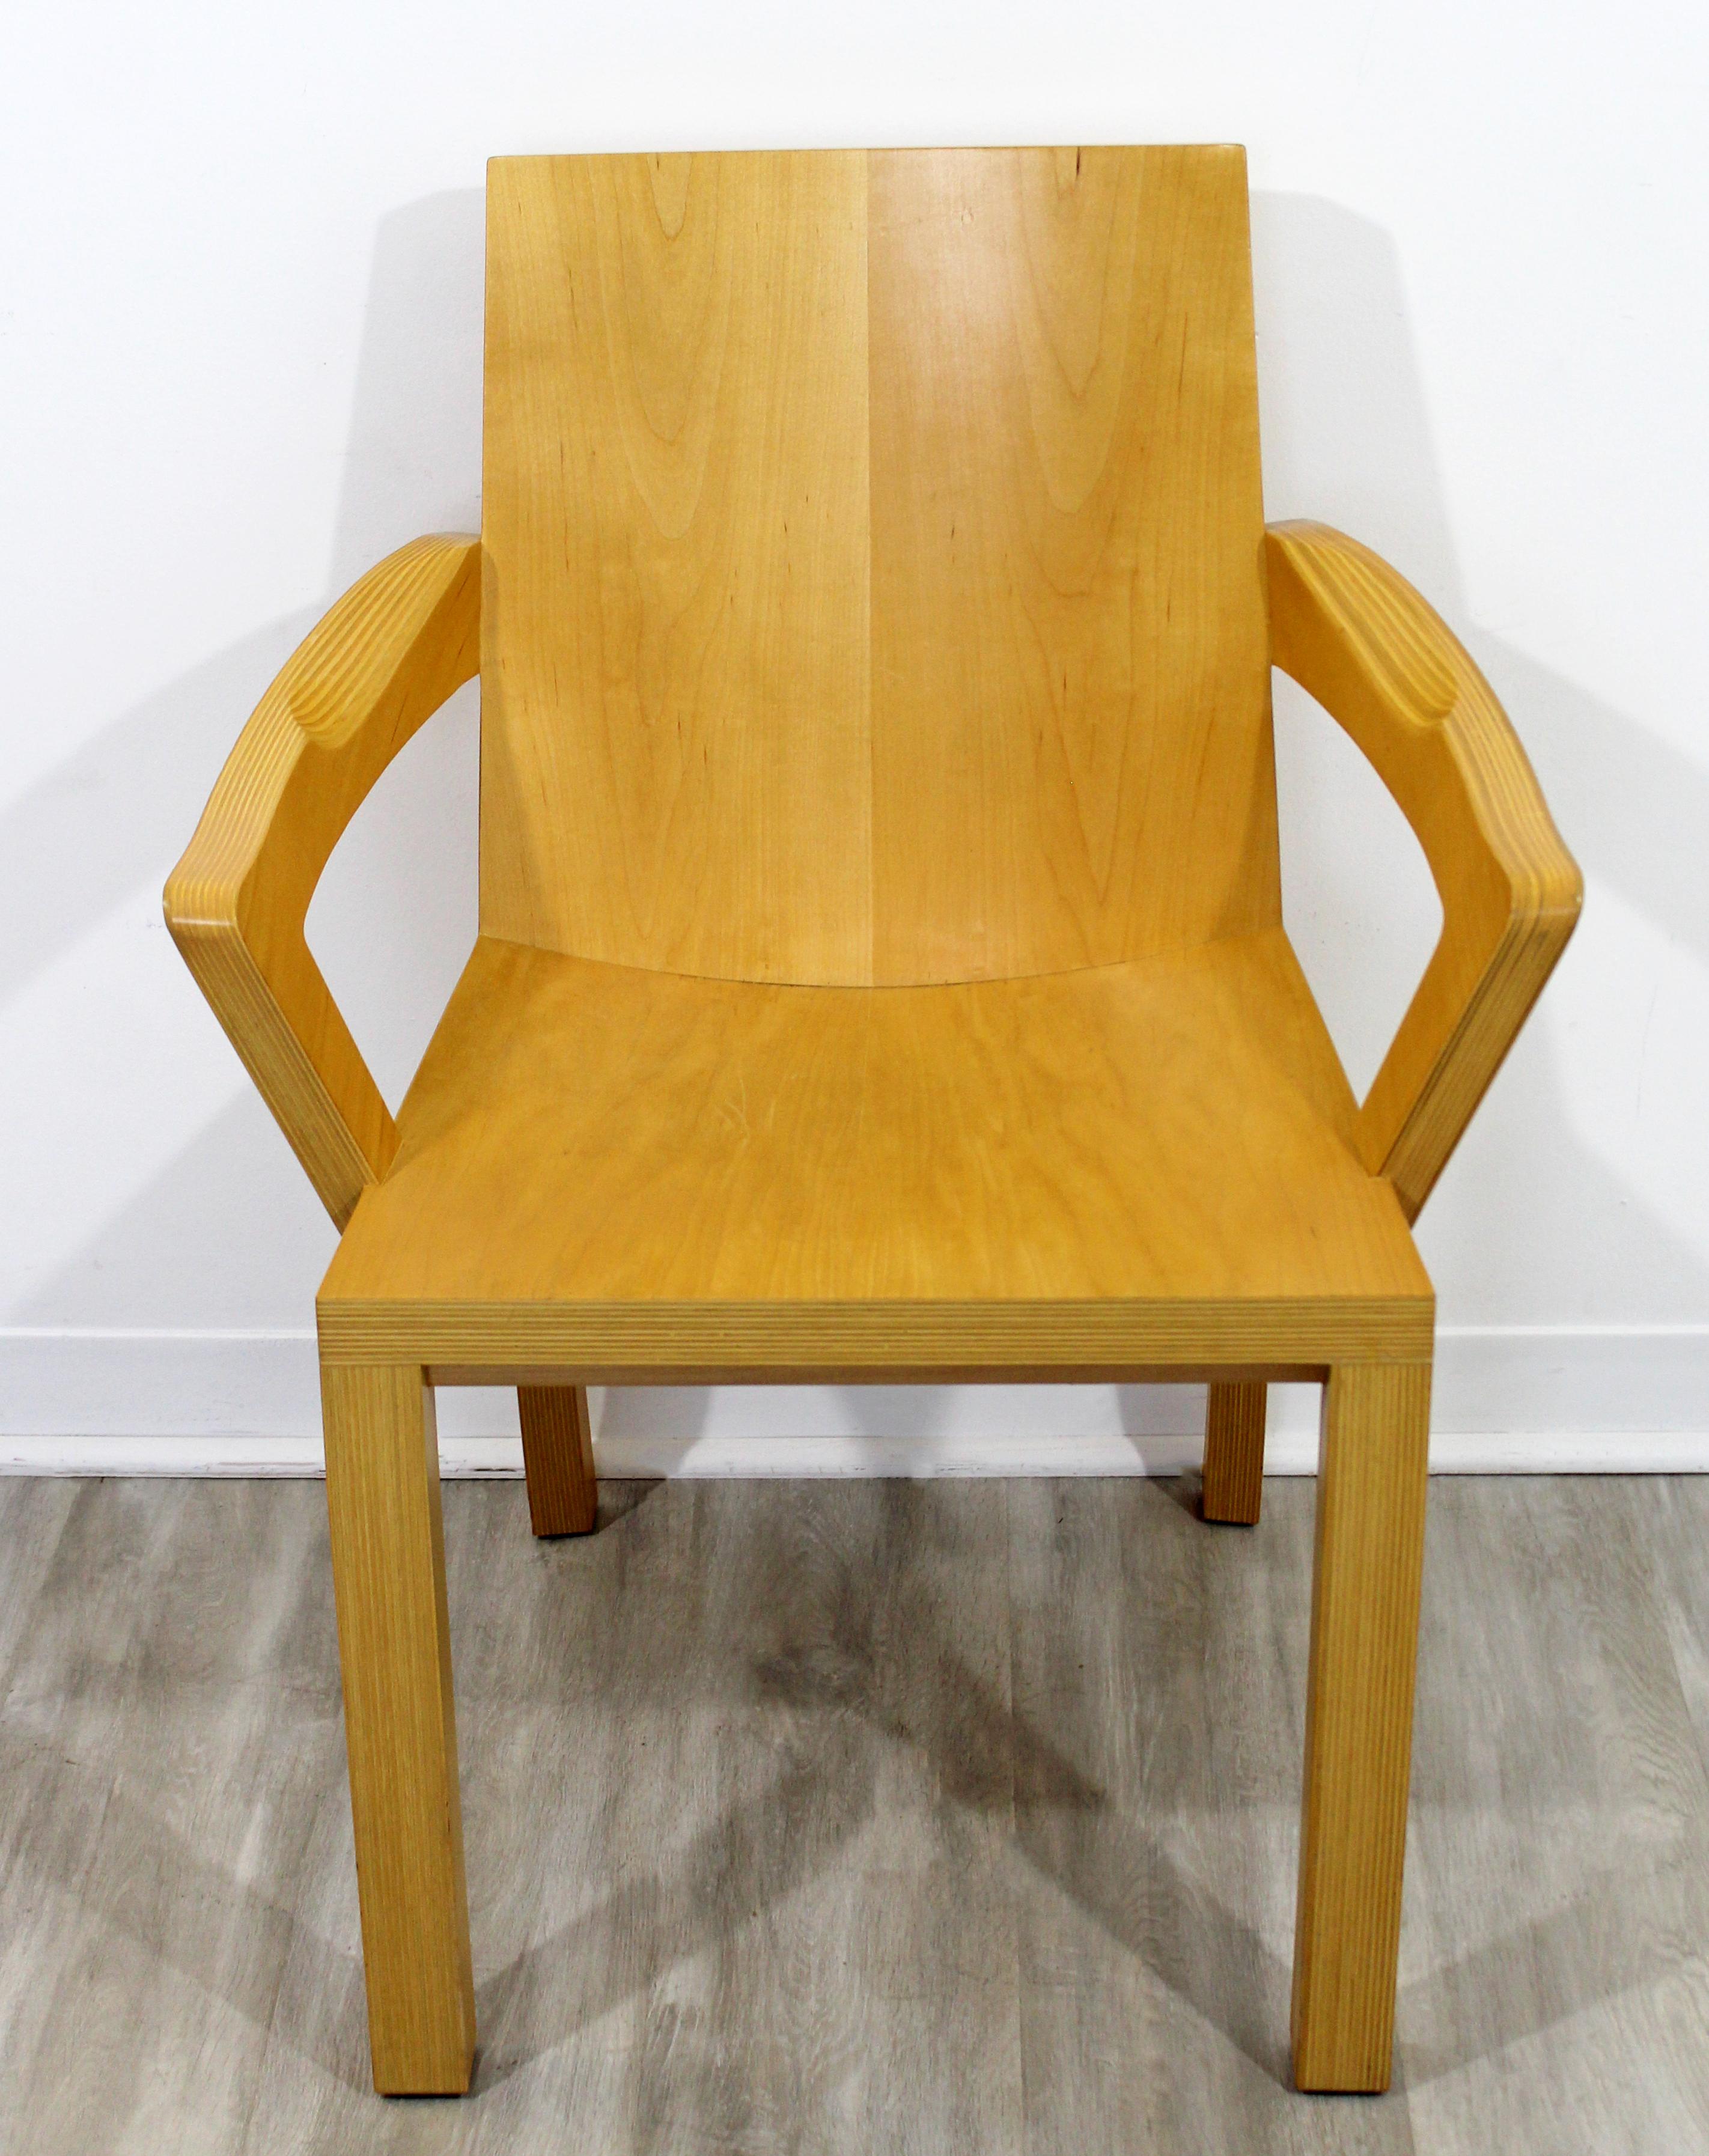 For your consideration is an exceptional set of eight, lacquered maple dining armchairs, by Dakota Jackson. In excellent vintage condition. The dimensions are 25.5